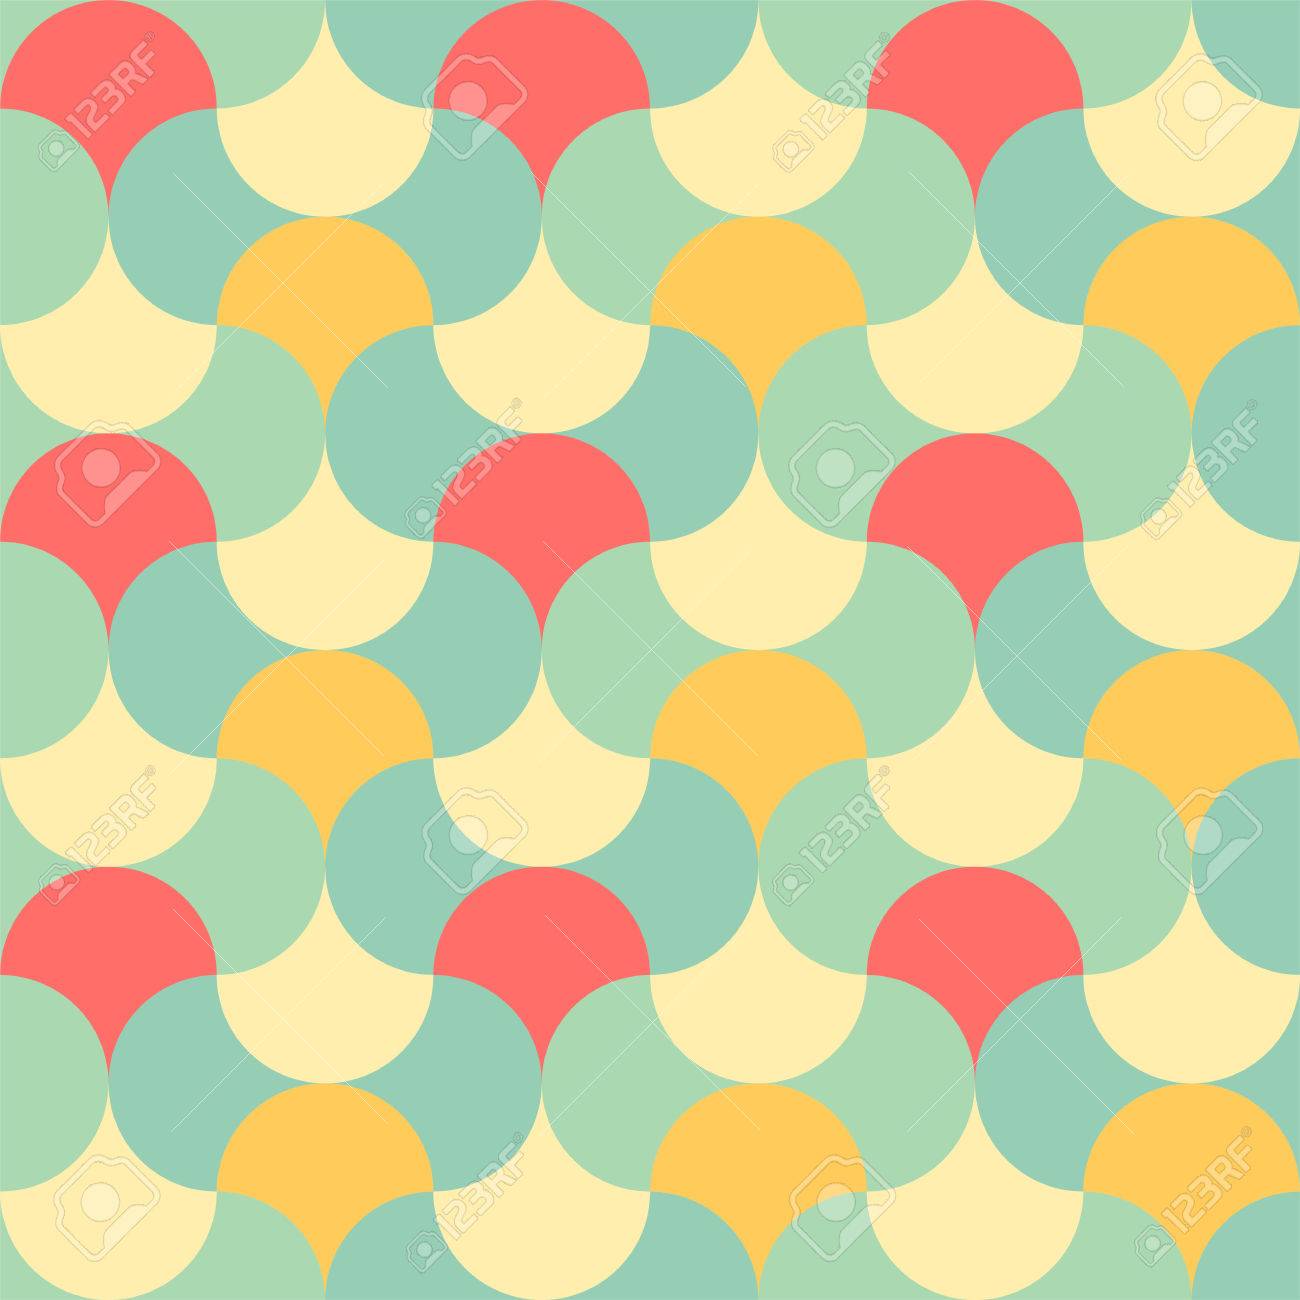 Abstract Pastel Color Tone Geometric Patterns Background Graphic